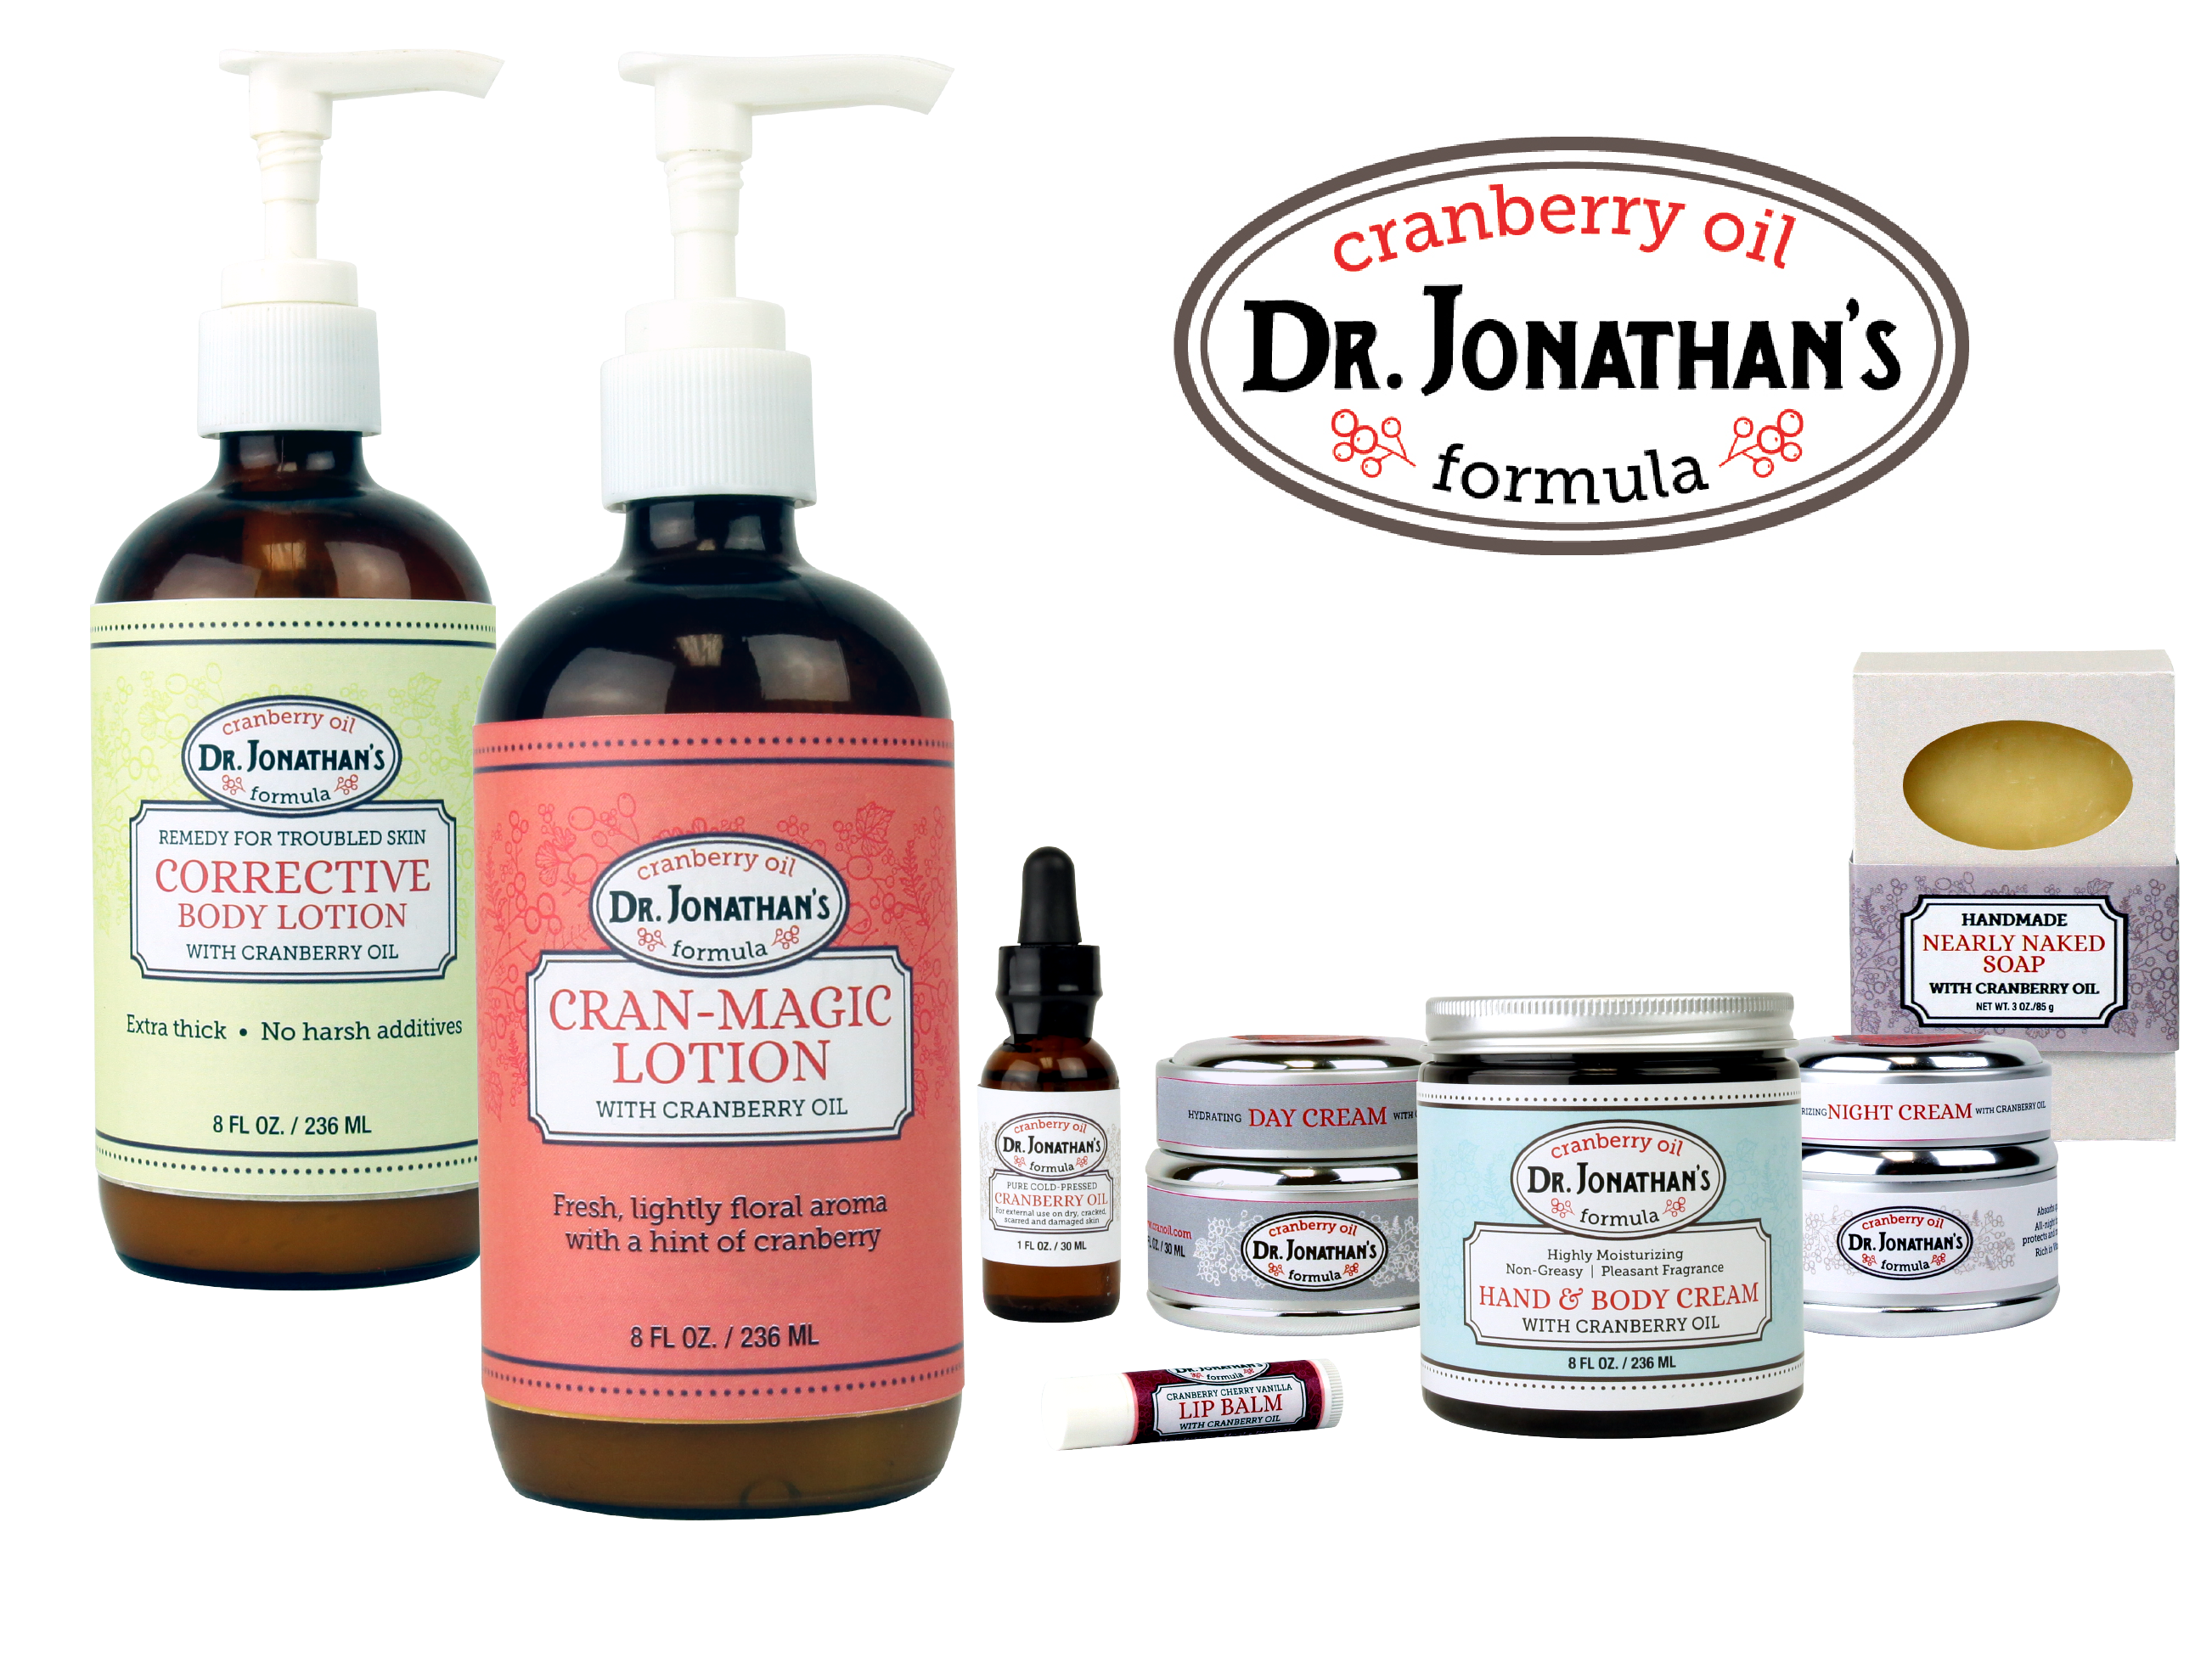 Dr. Jonathan's logo and packaging